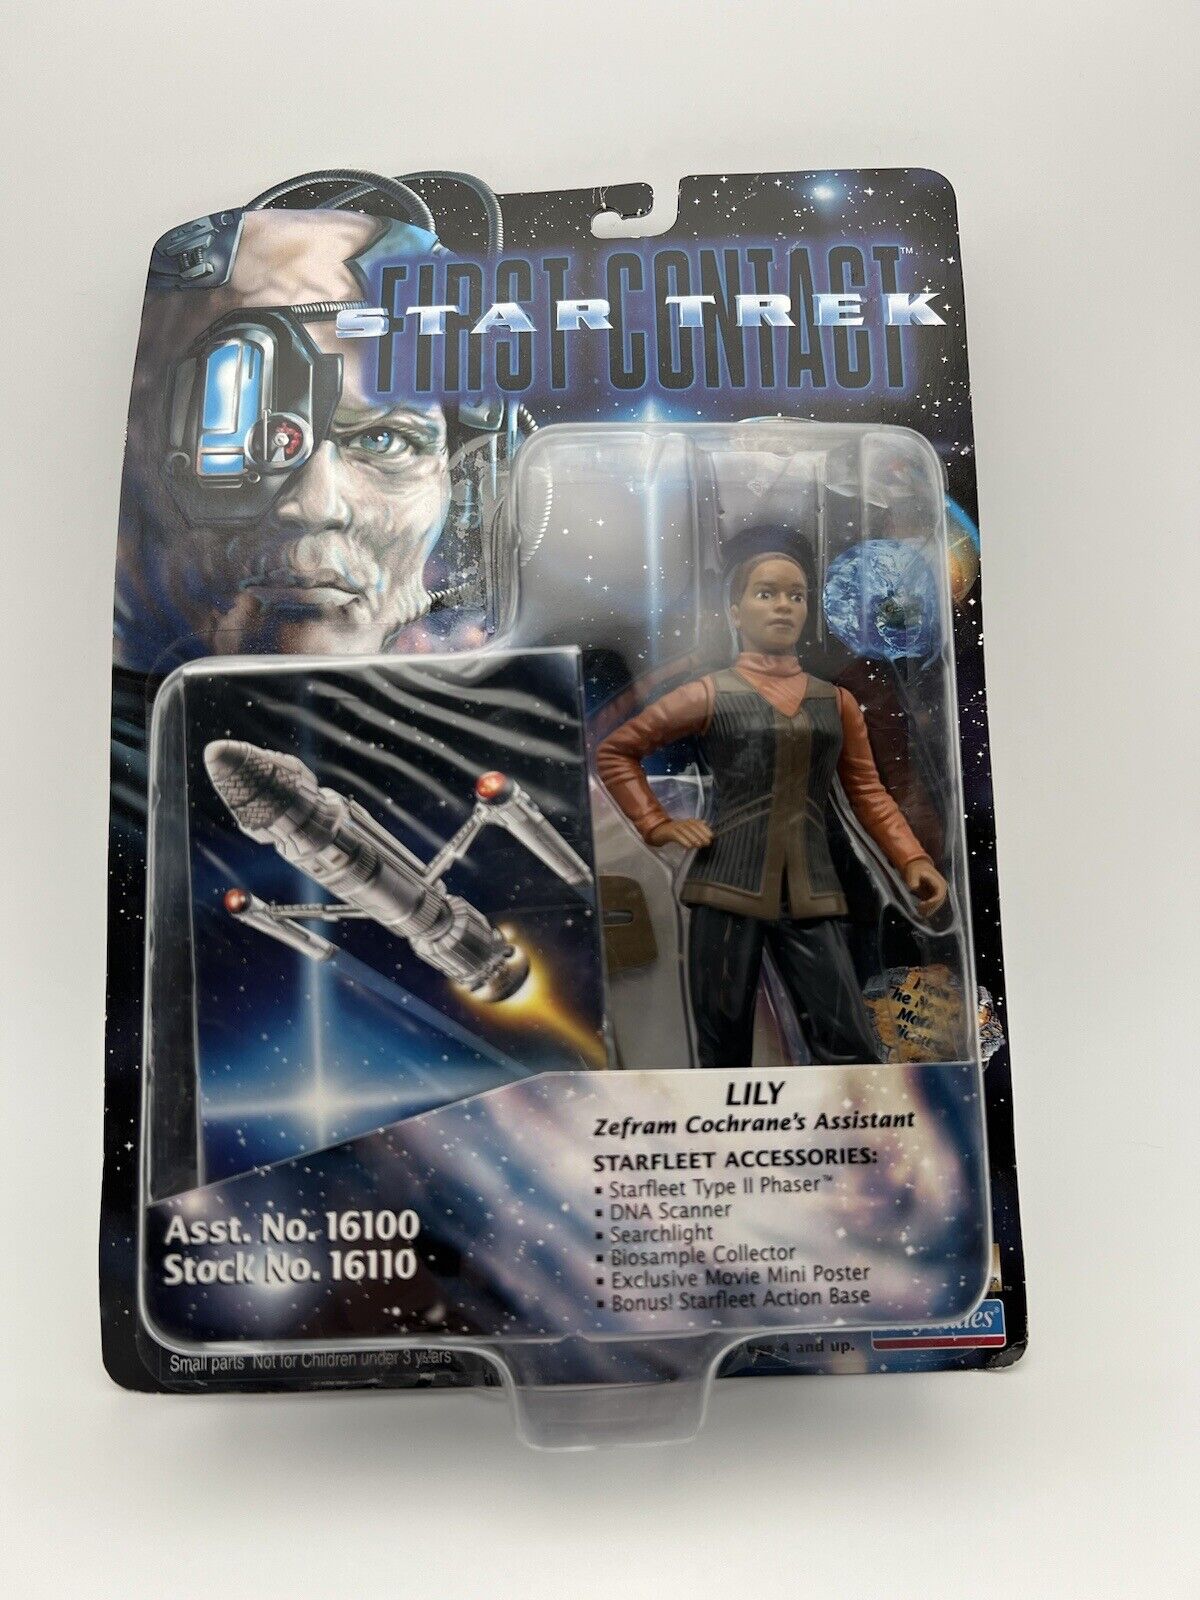 Star Trek First Contact Lily Action Figure Playmates 1996 NEW IN BOX Playmates Toys n/a